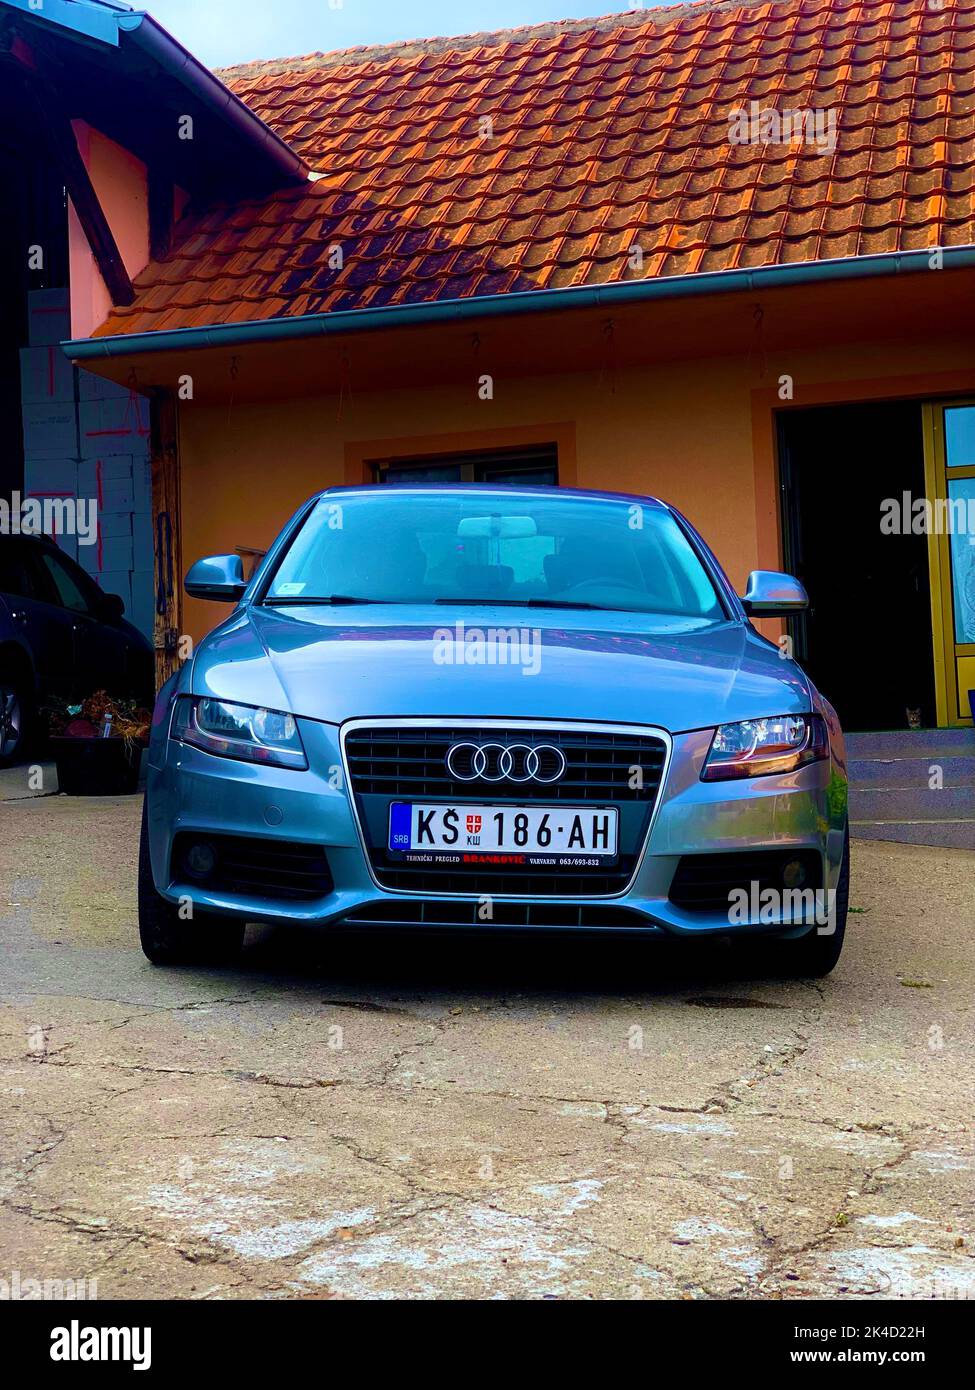 A vertical shot of a silver Audi S4 car on a porch Stock Photo